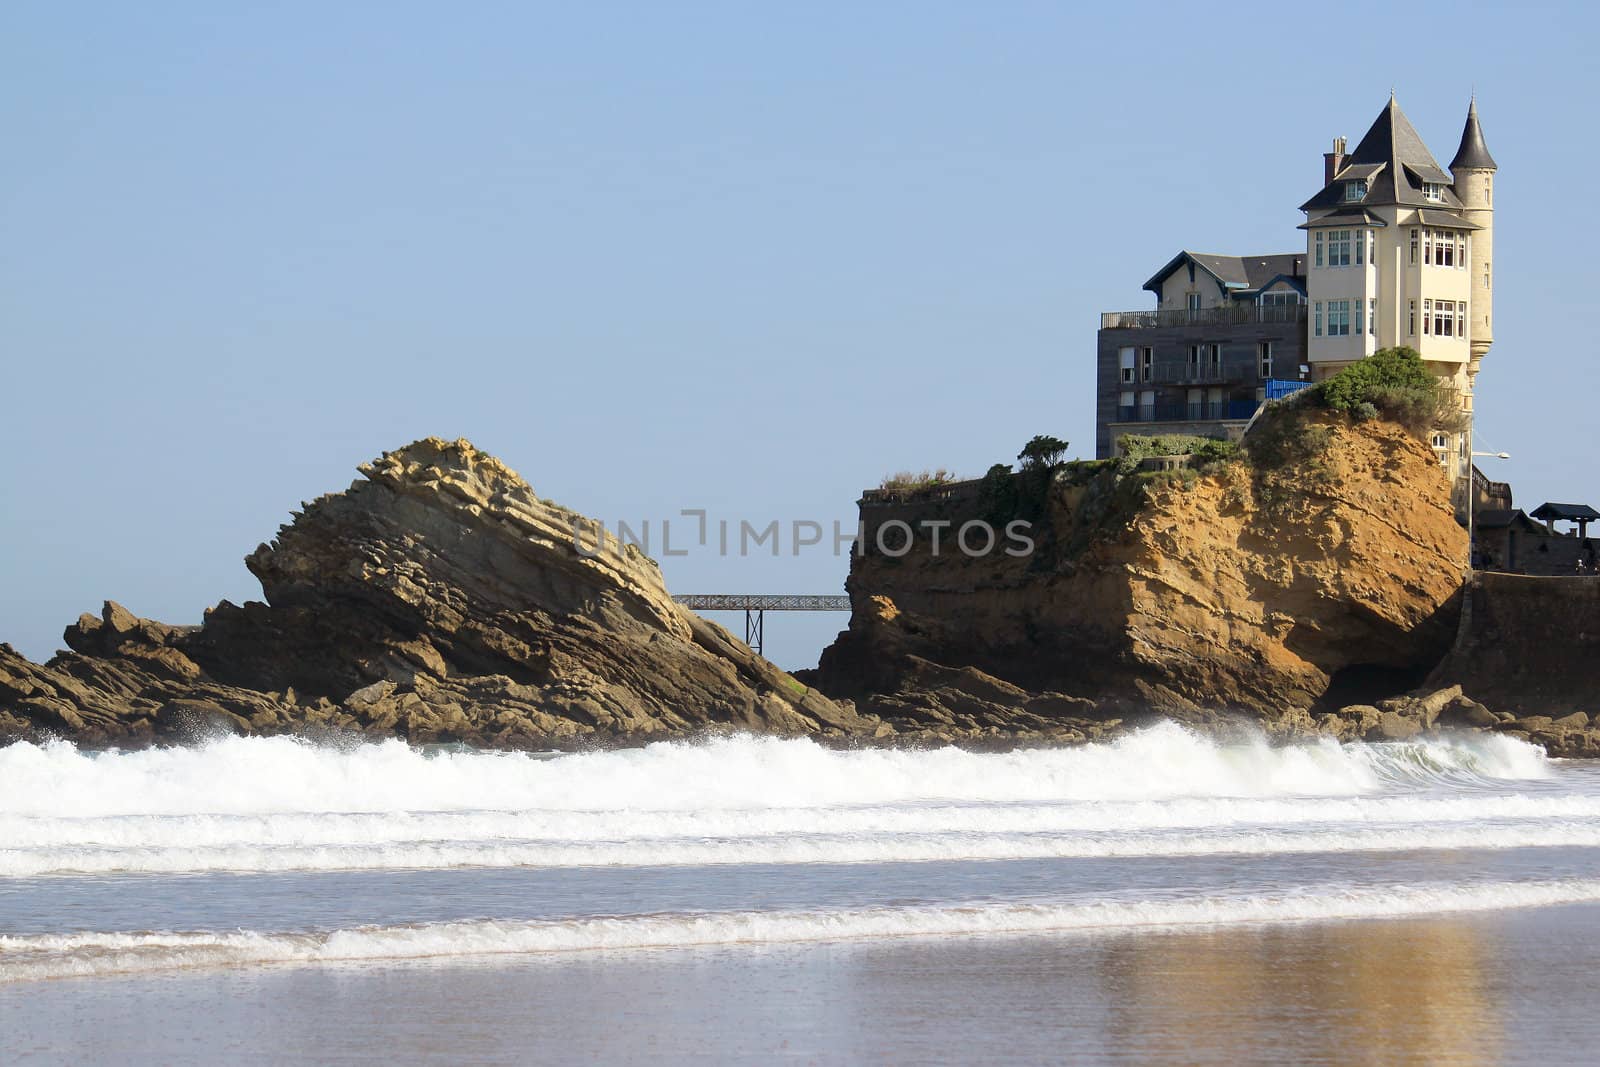 An old mansion perched on a rock in the ocean near a beach on a blue sky background